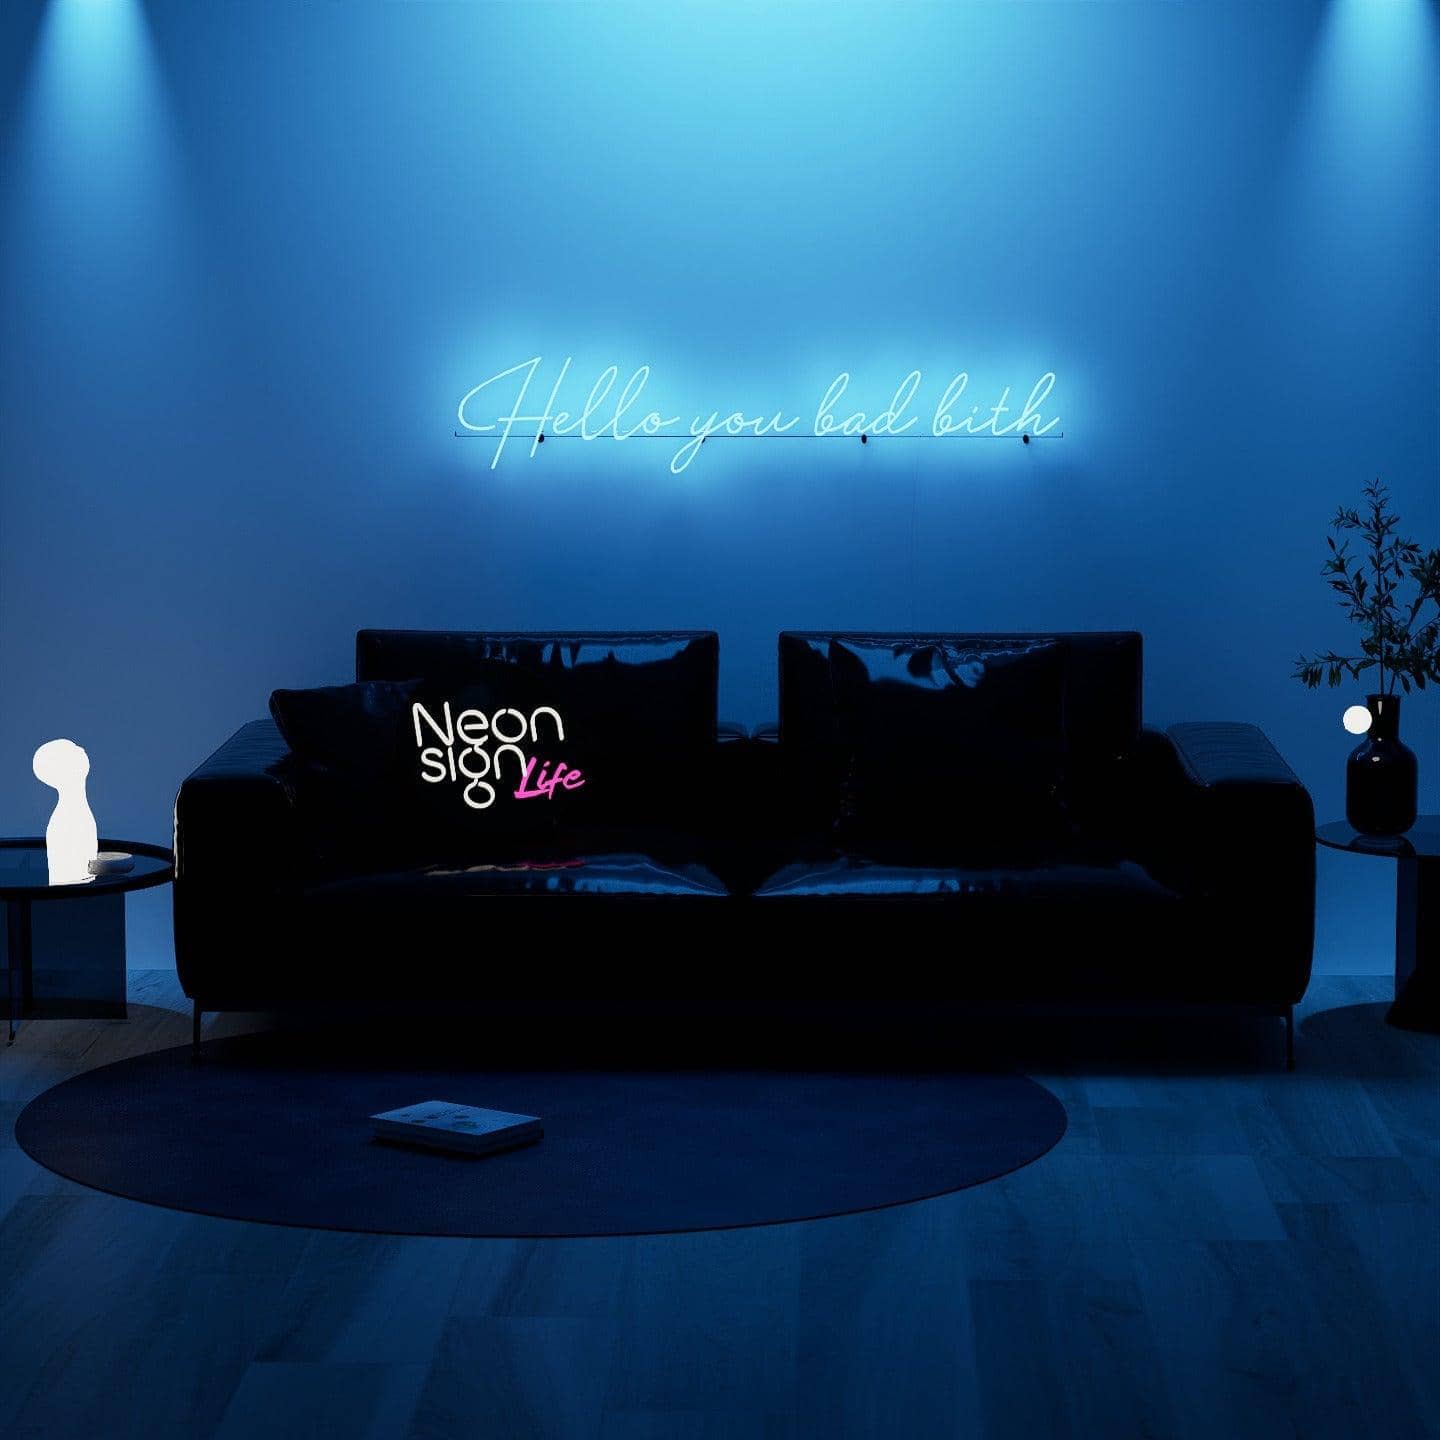 night-shot-of-lit-blue-neon-lights-hanging-on-the-wall-for-display-hello-you-bad-bith